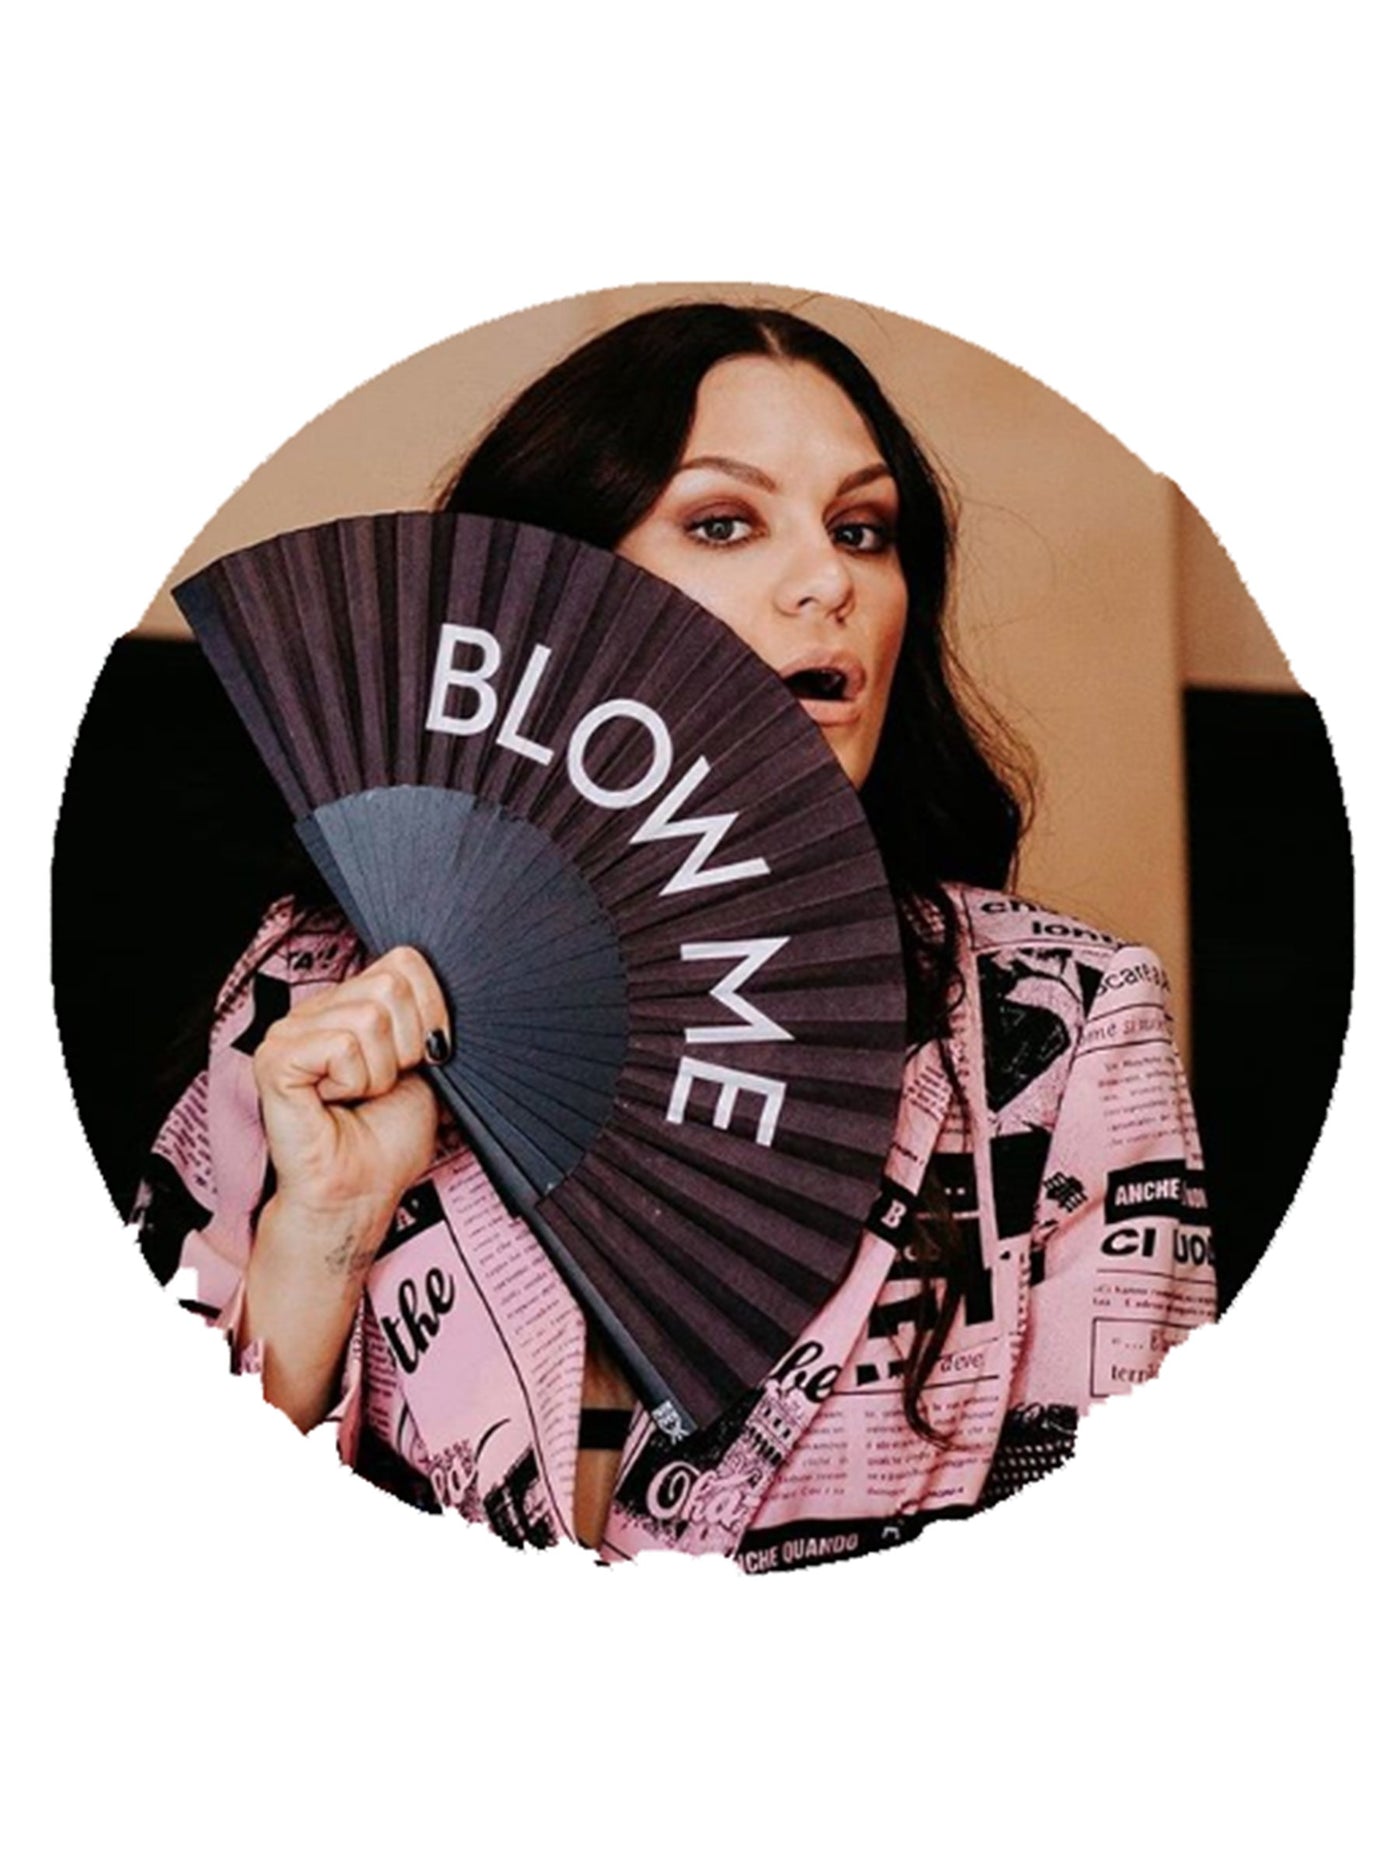 Jessie J wearing pink and black top and holding Khu Khu Blow Me hand-fan at Abbey Road Studios